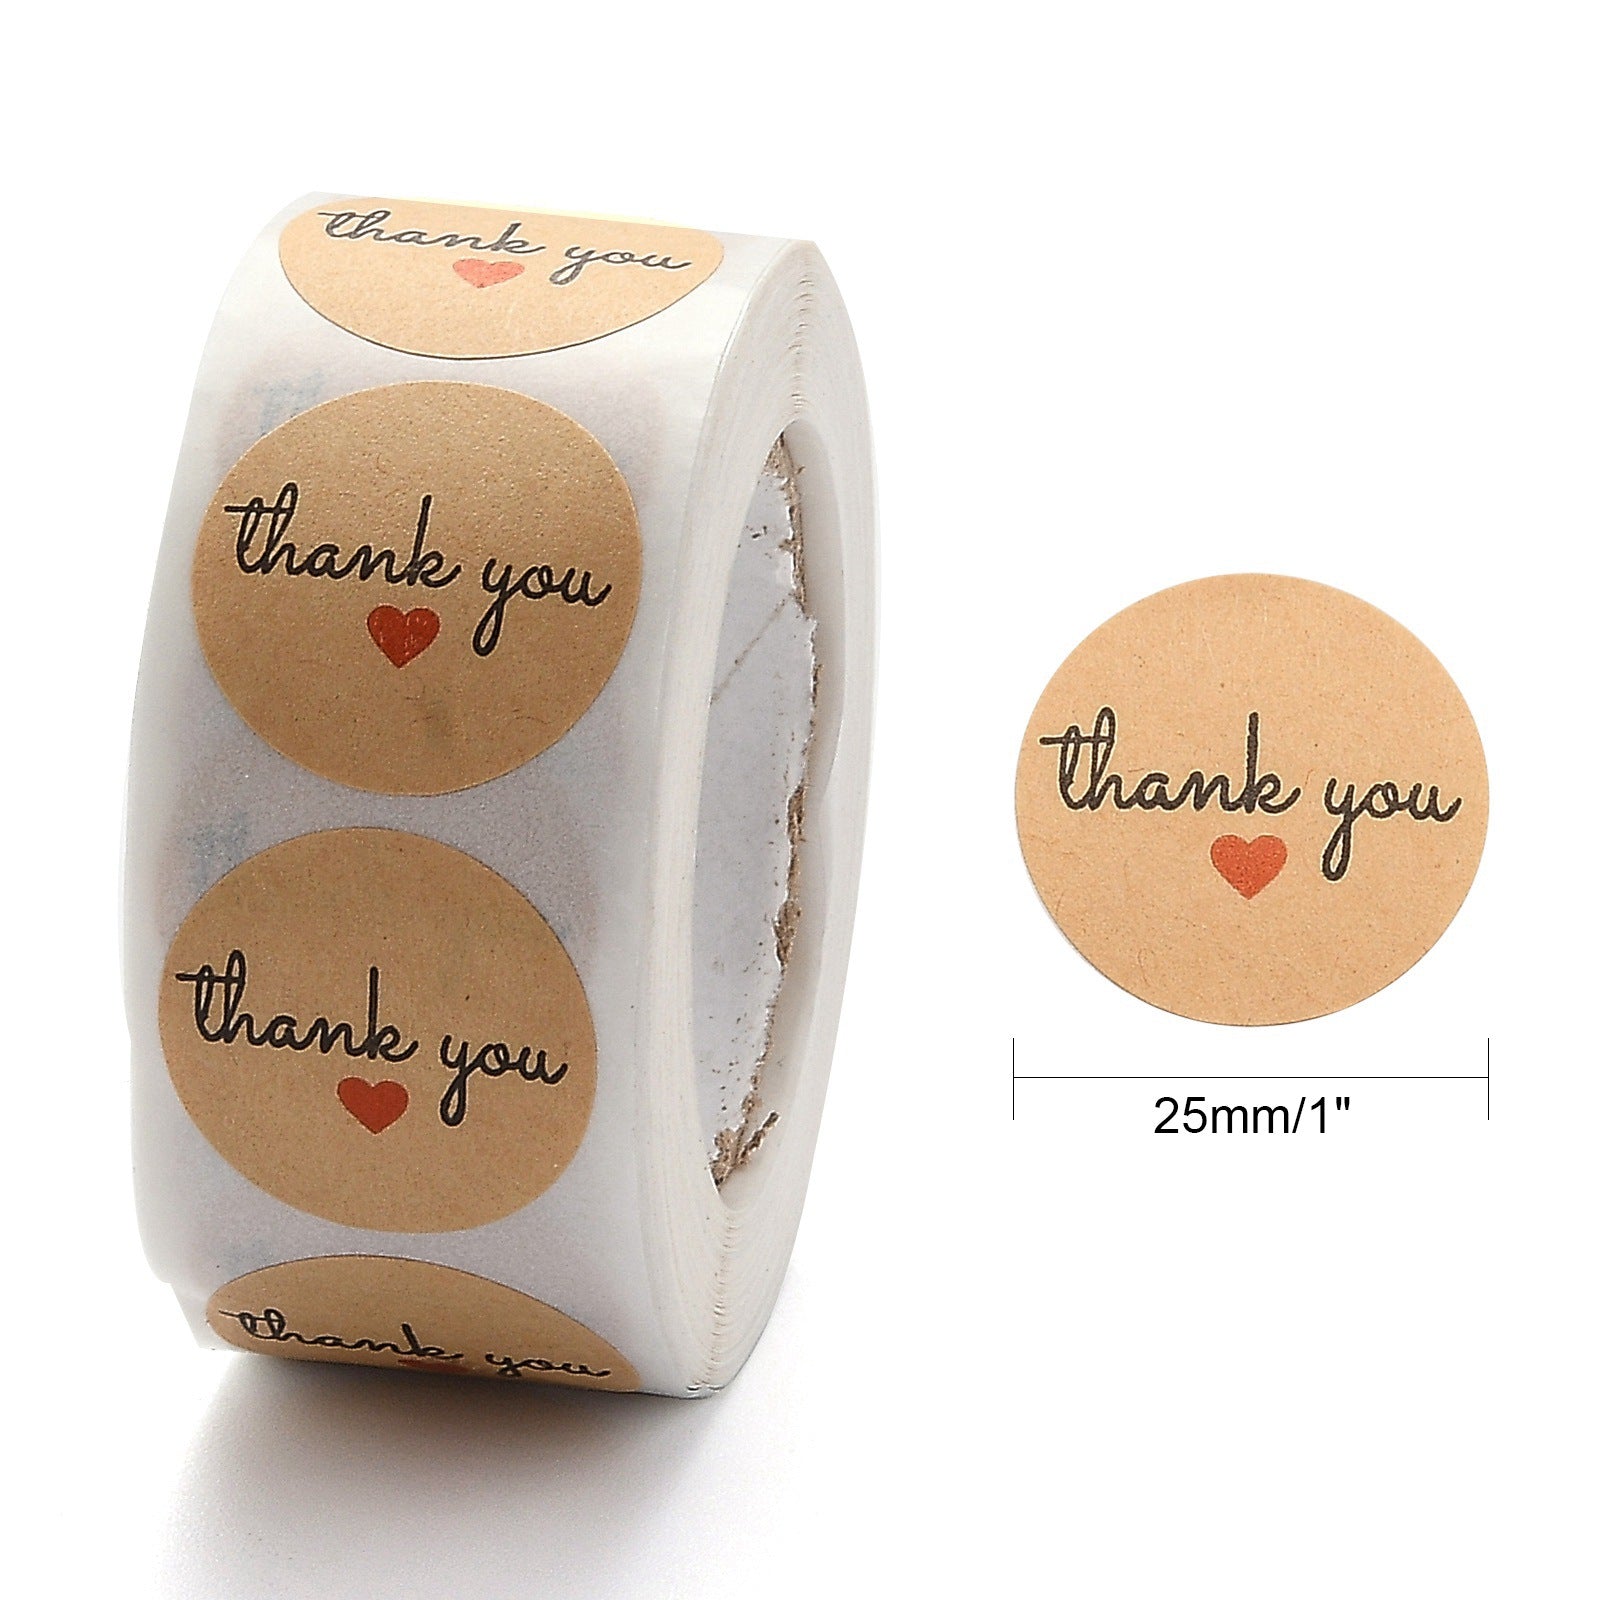 Globleland 1 Inch Thank You Stickers, Self-Adhesive Paper Gift Tag Stickers, Adhesive Labels On A Roll for Party, Christmas Holiday Decorative Presents, Word Thank You, BurlyWood, Sticker: 25mm, 500pcs/roll